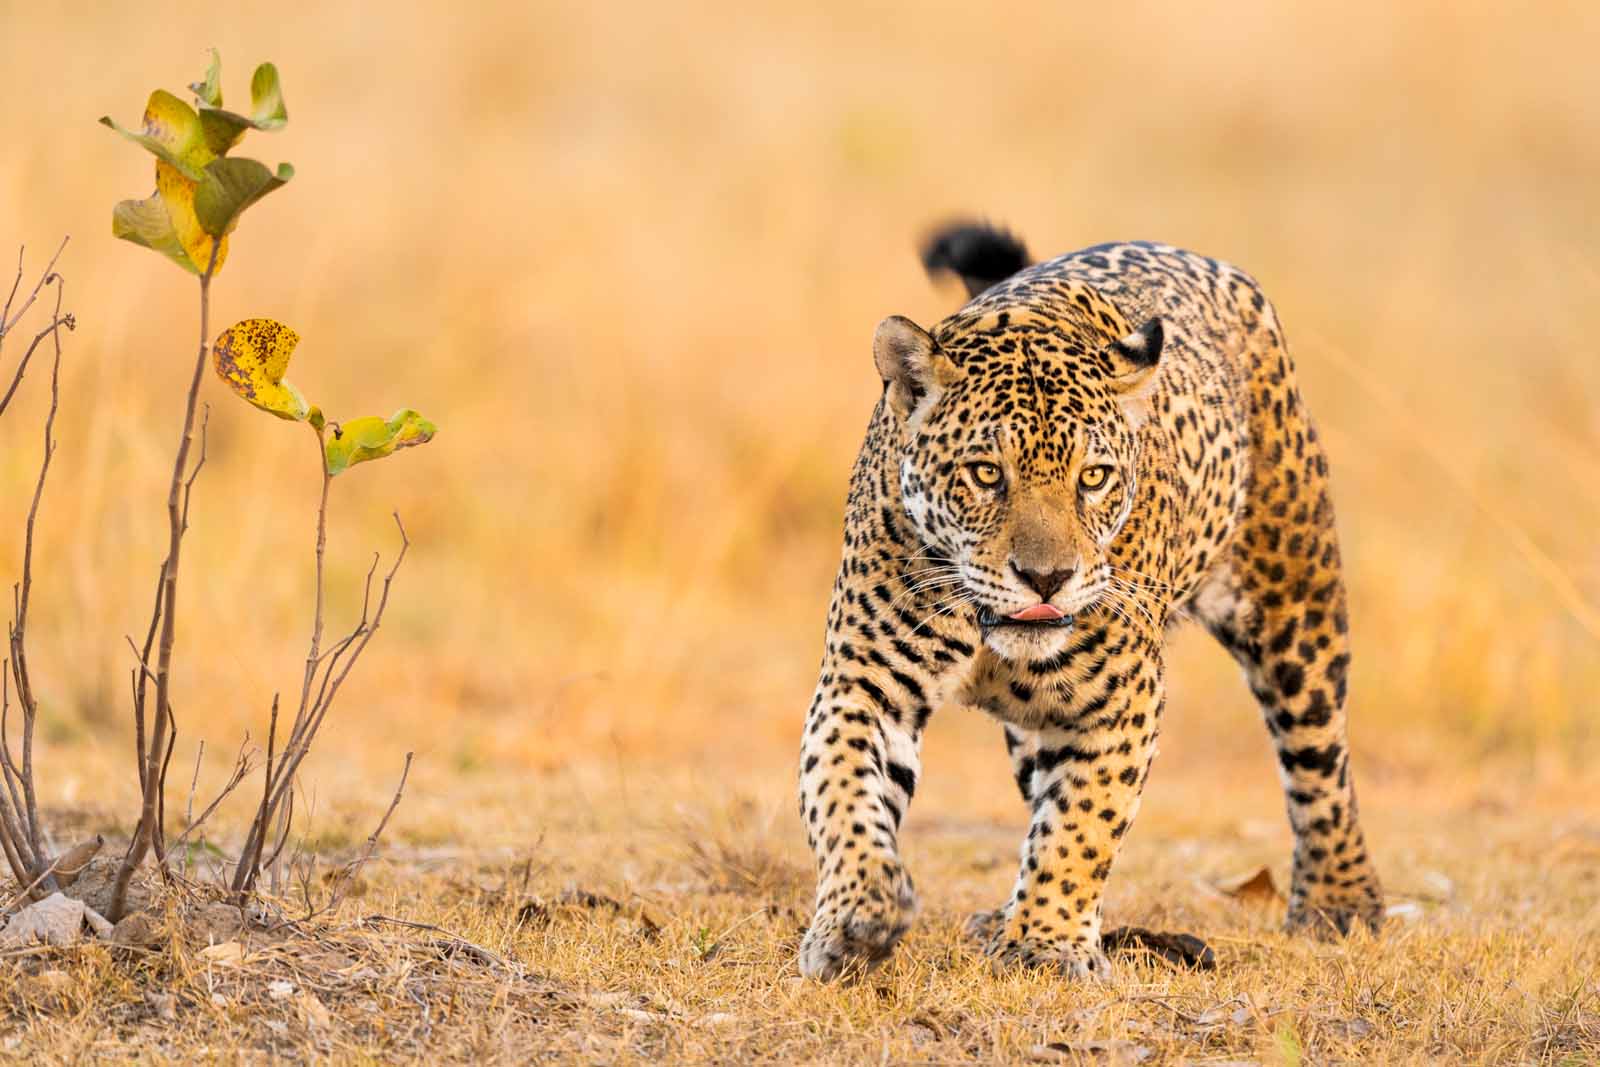 HAVE INTIMATE ENCOUNTERS WITH JAGUARS ON LAND